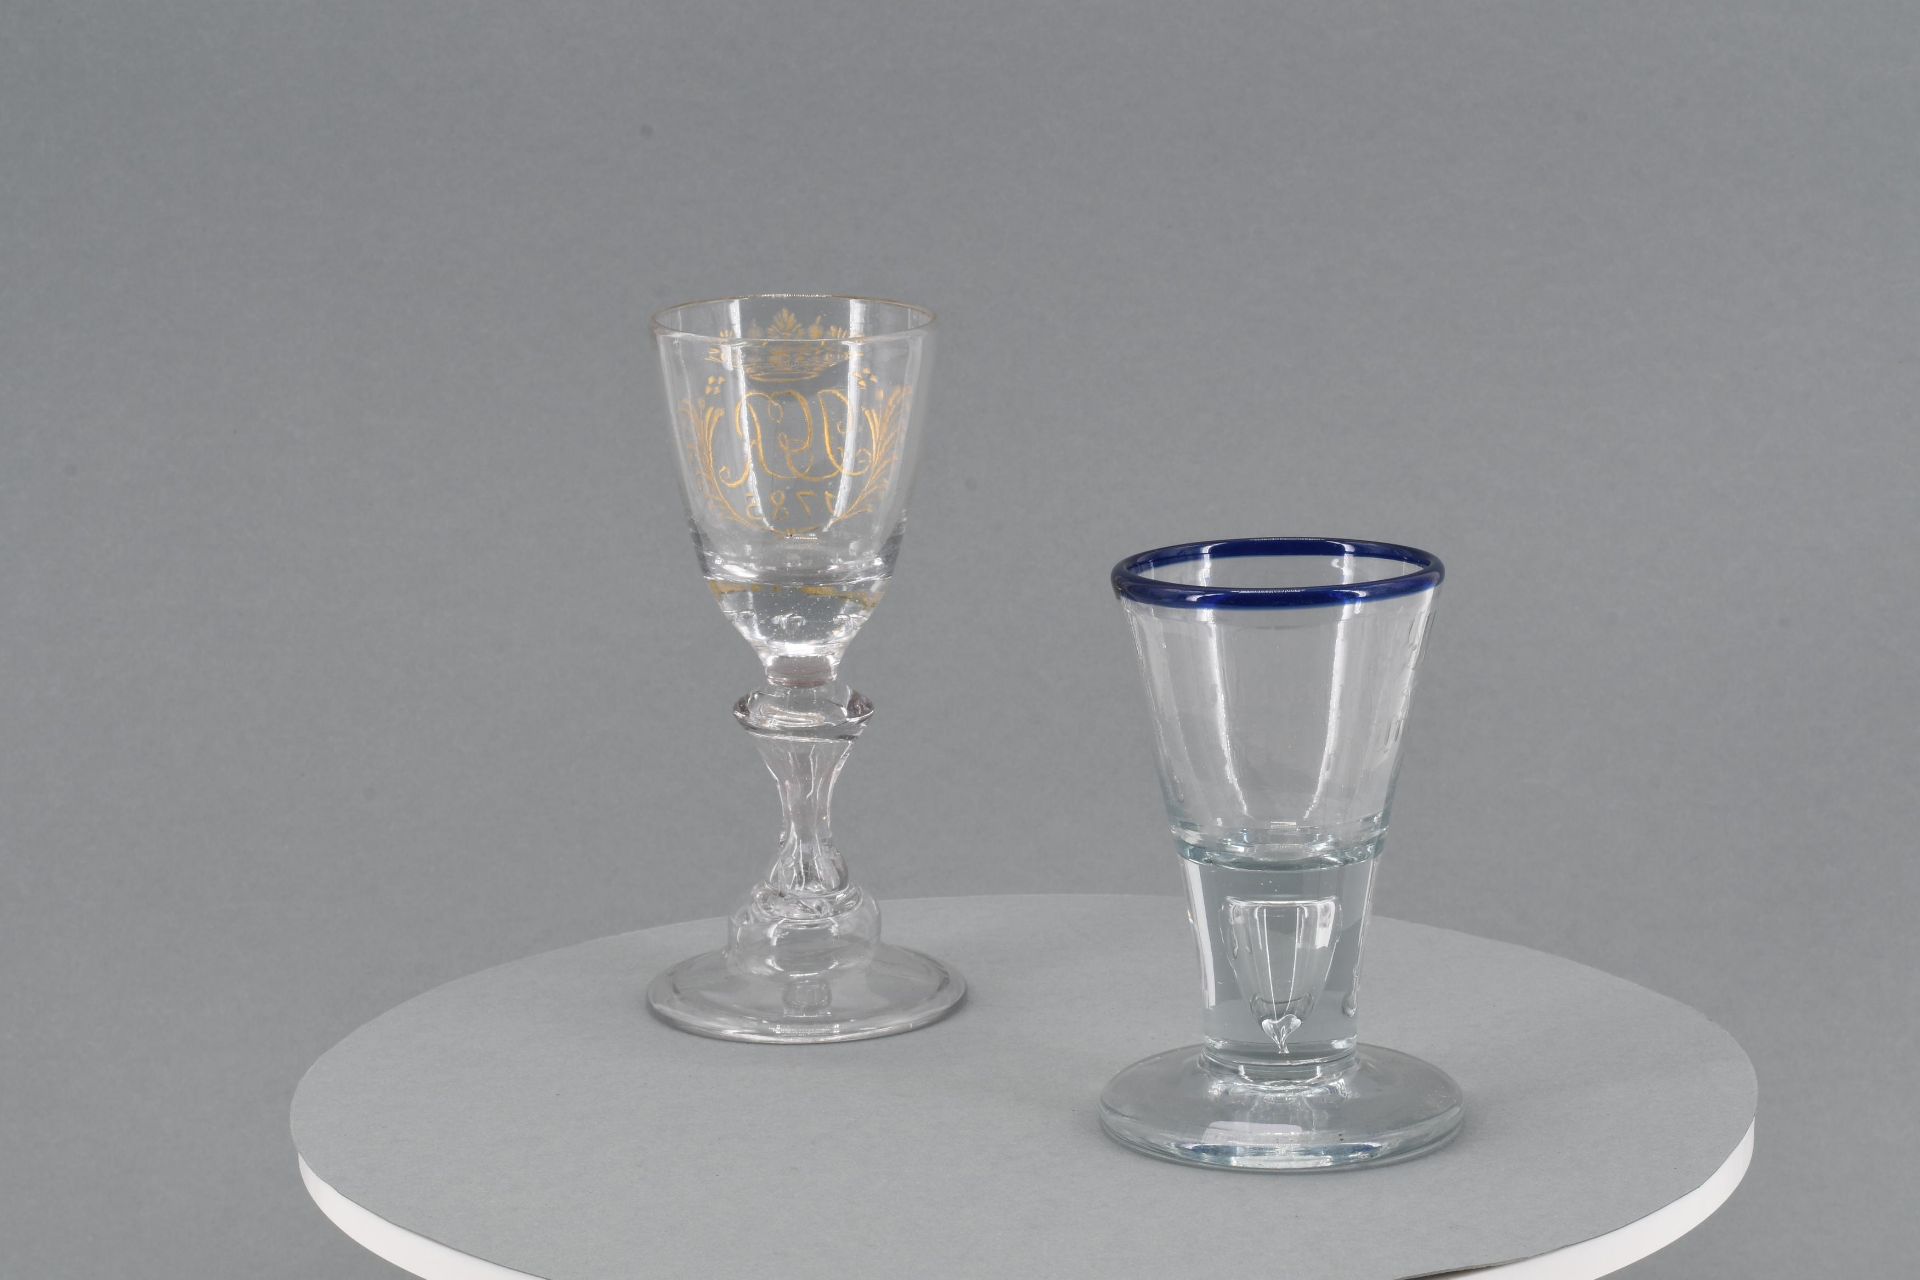 Goblet with monogram and schnapps glass with blue rim - Image 5 of 15